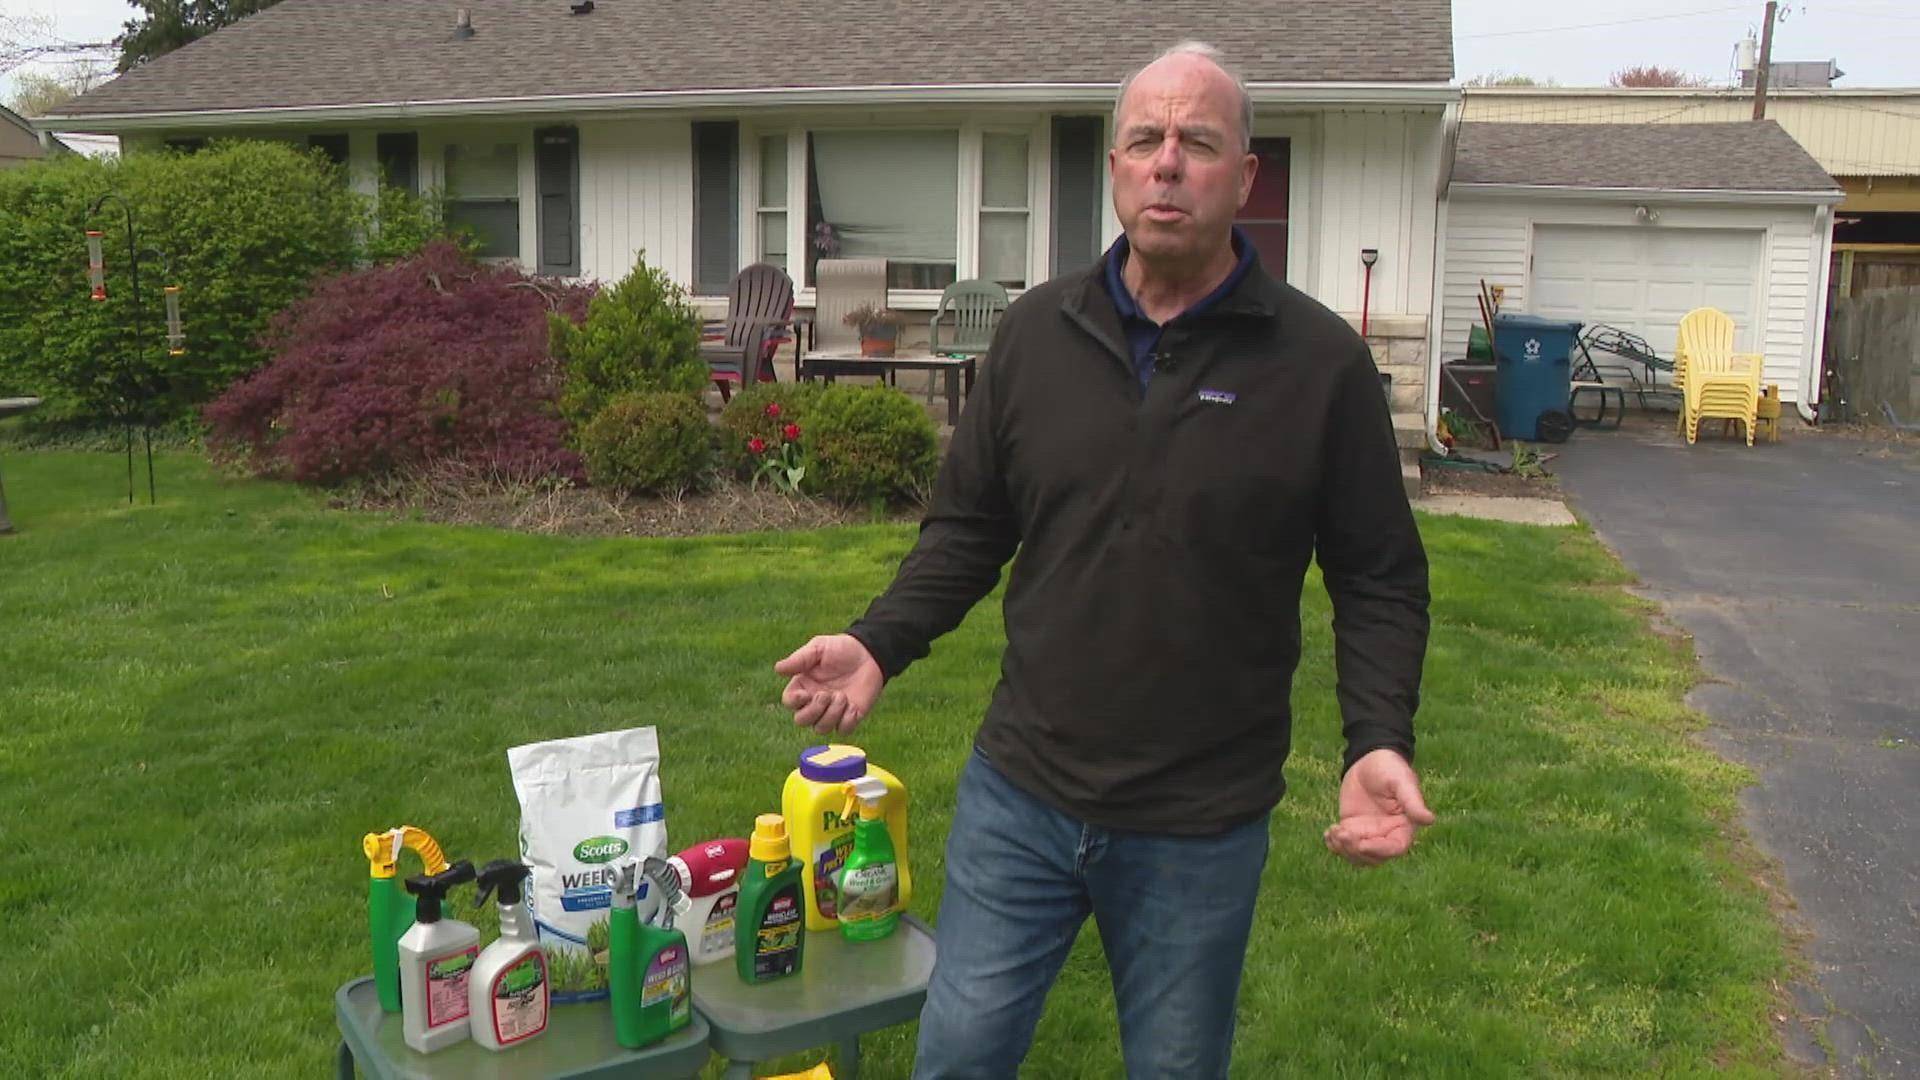 Pat Sullivan shows you how to get your home ready for spring from weeding to mulching.